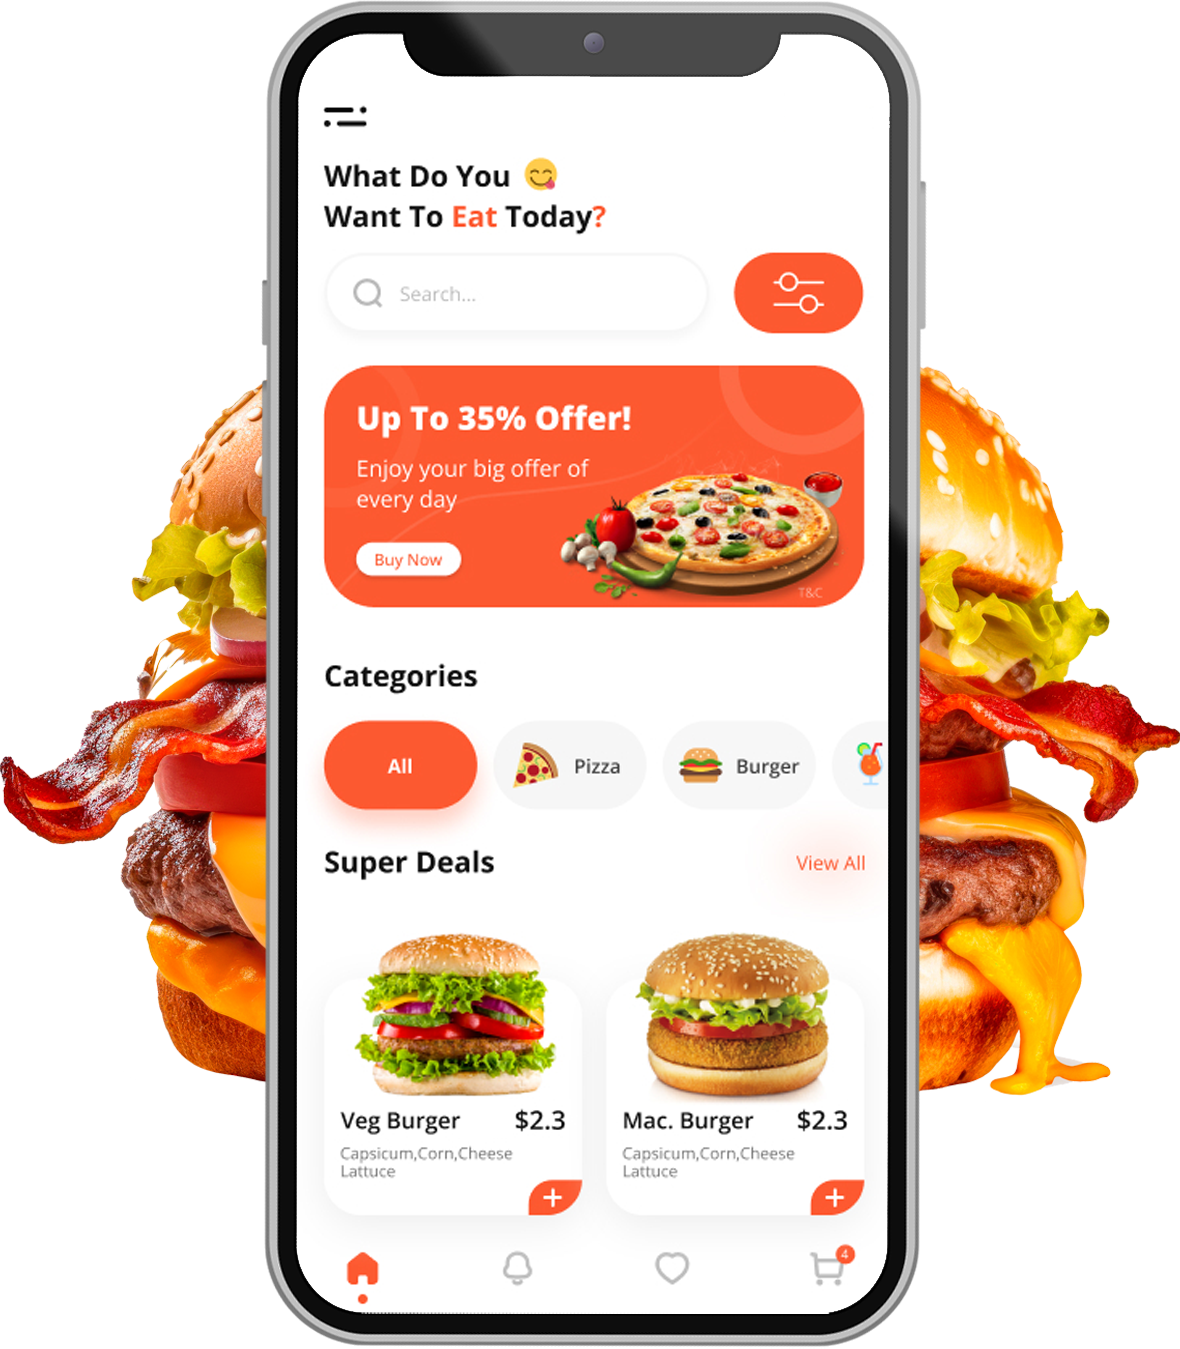 Why Choose Inventcolabs For Food Delivery App Development?